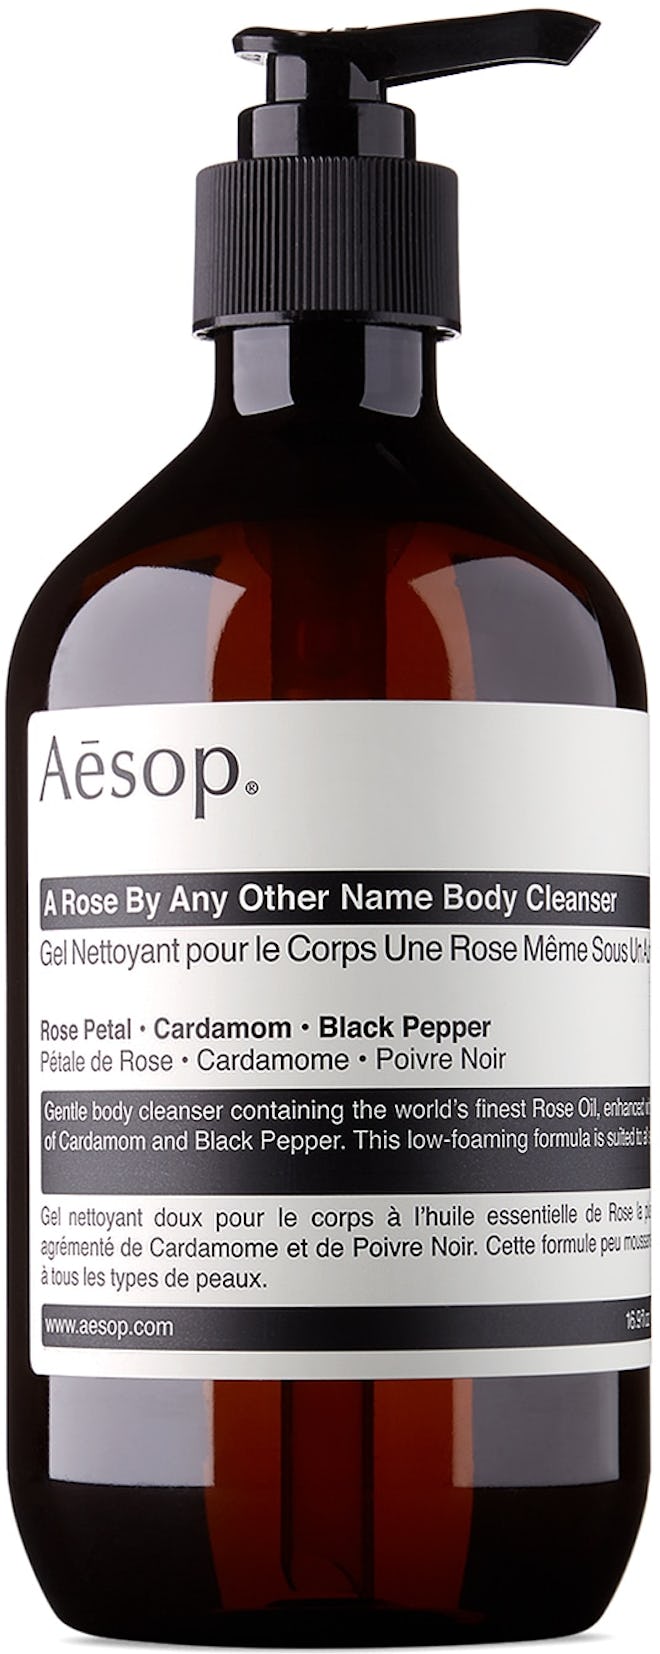 A Rose By Any Other Name Body Cleanser